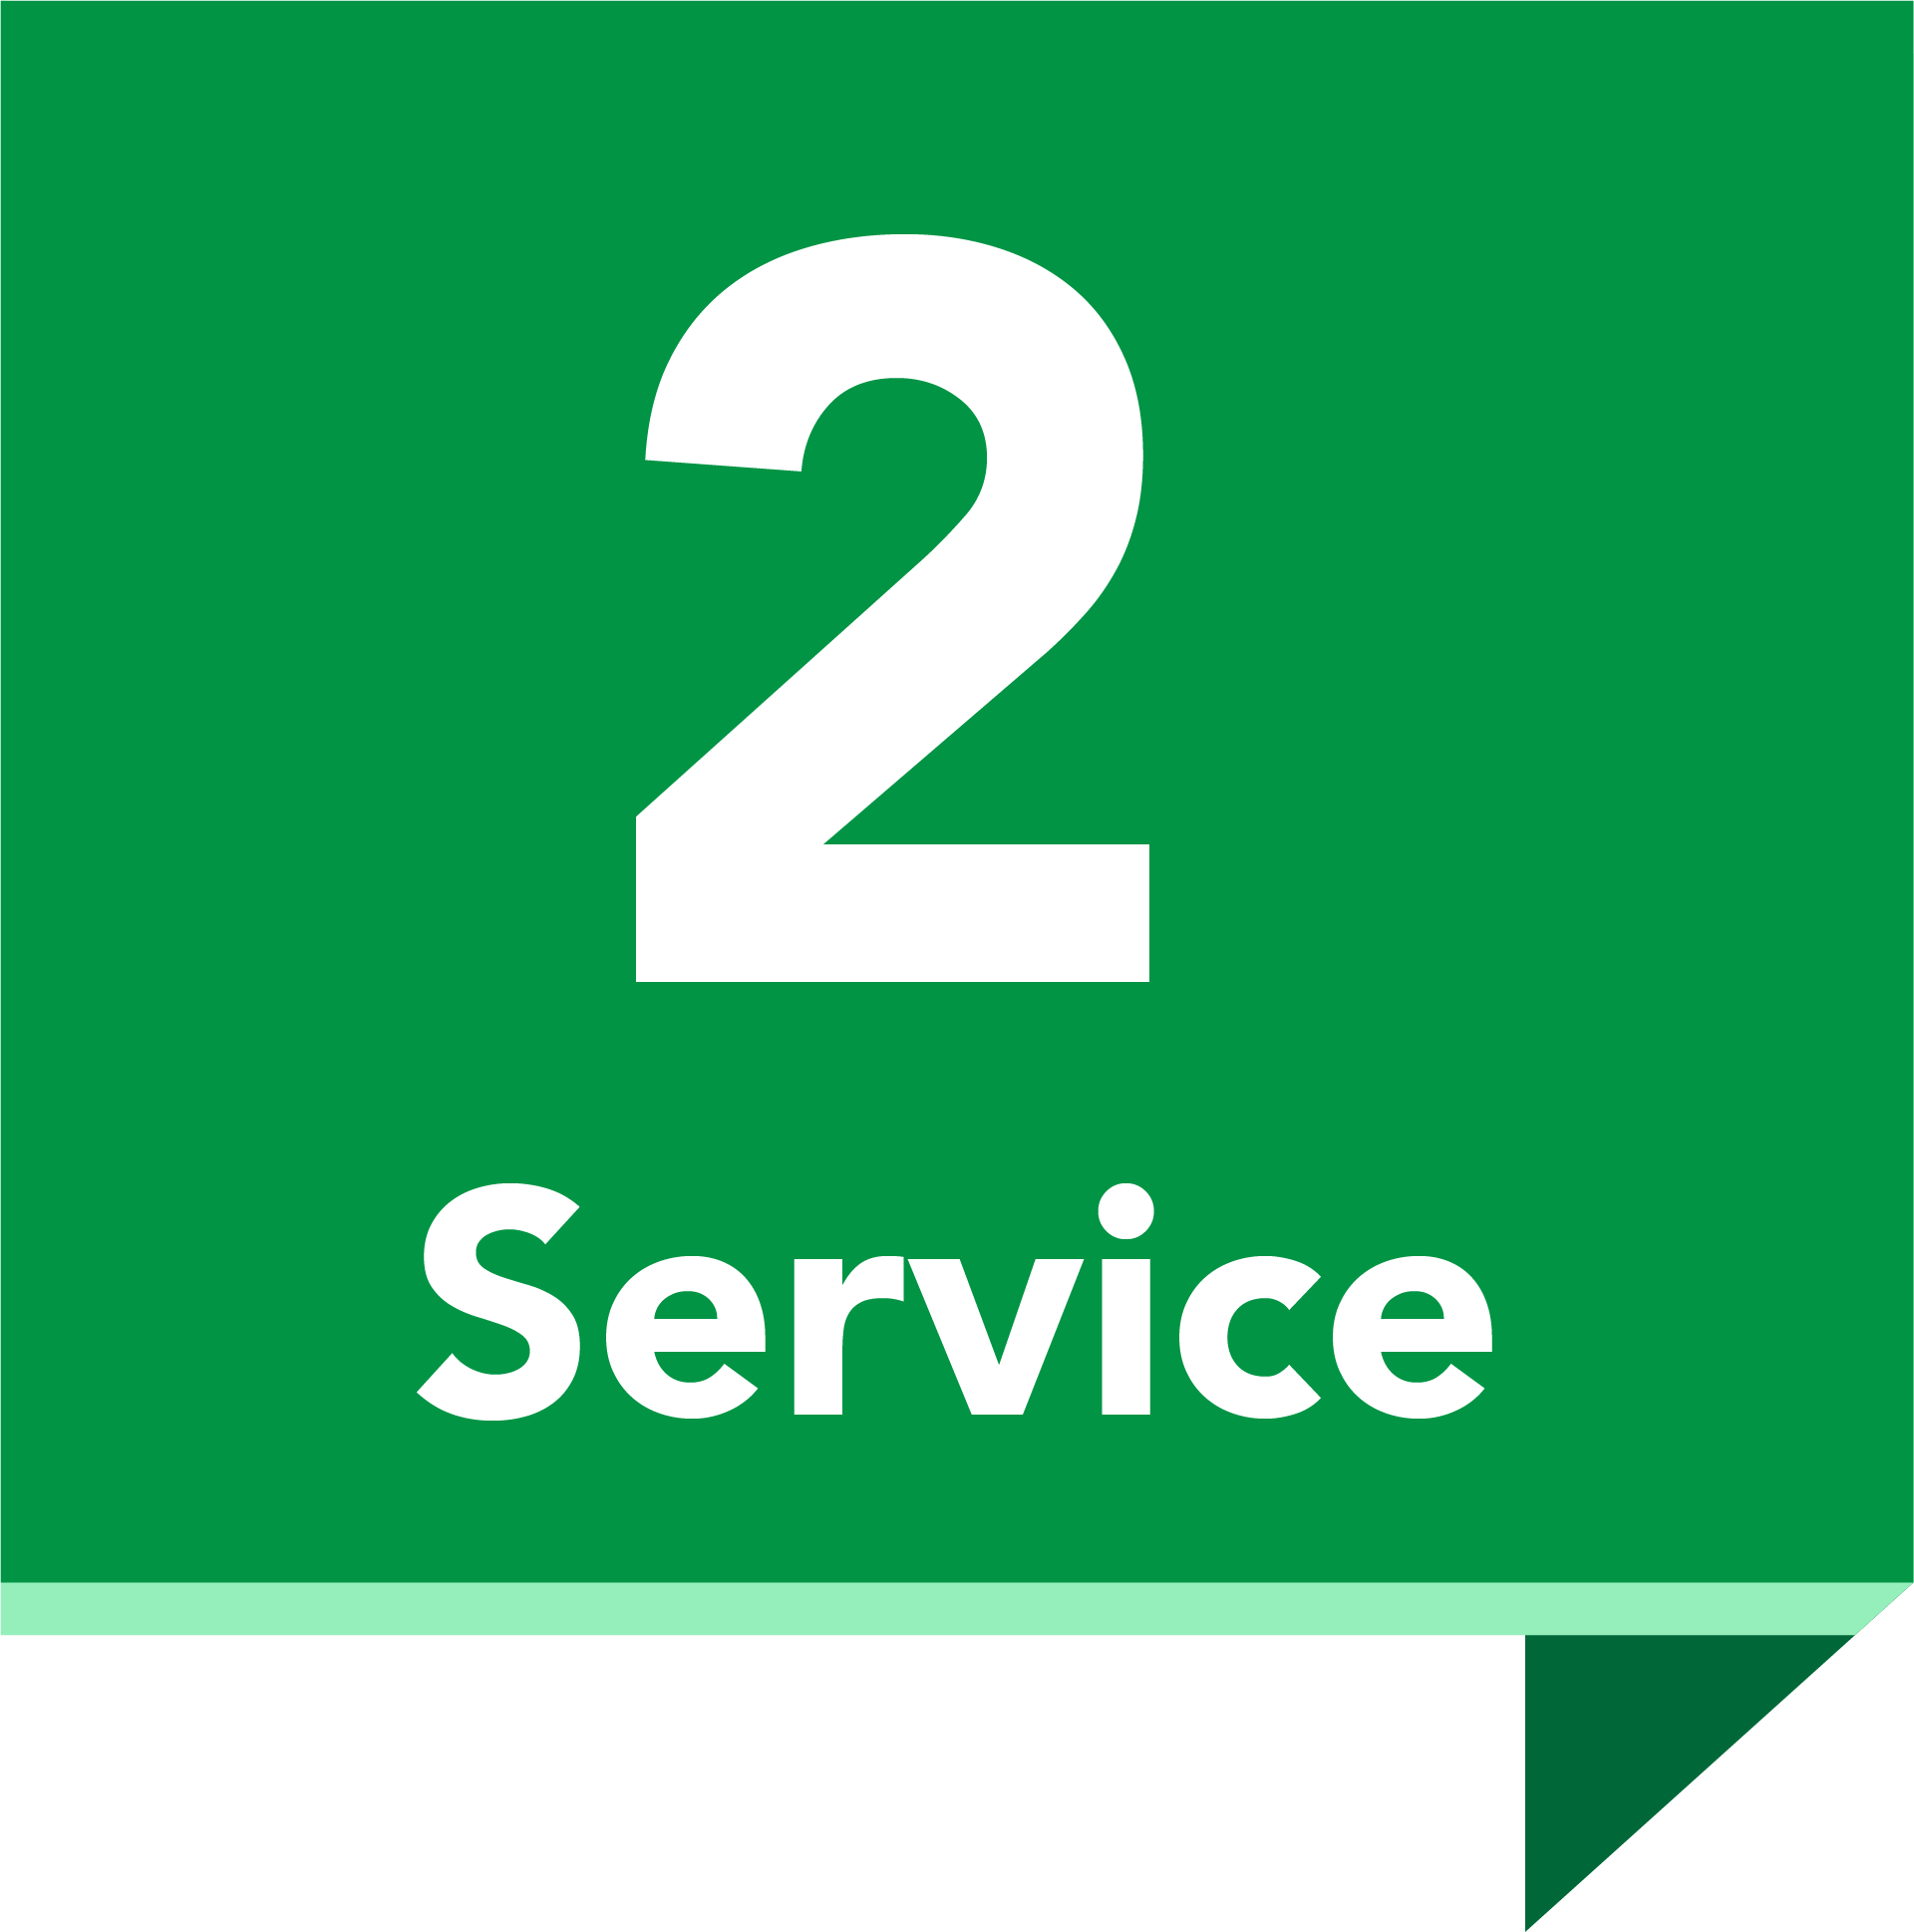 A green sign with the number 2 and the word service on it.